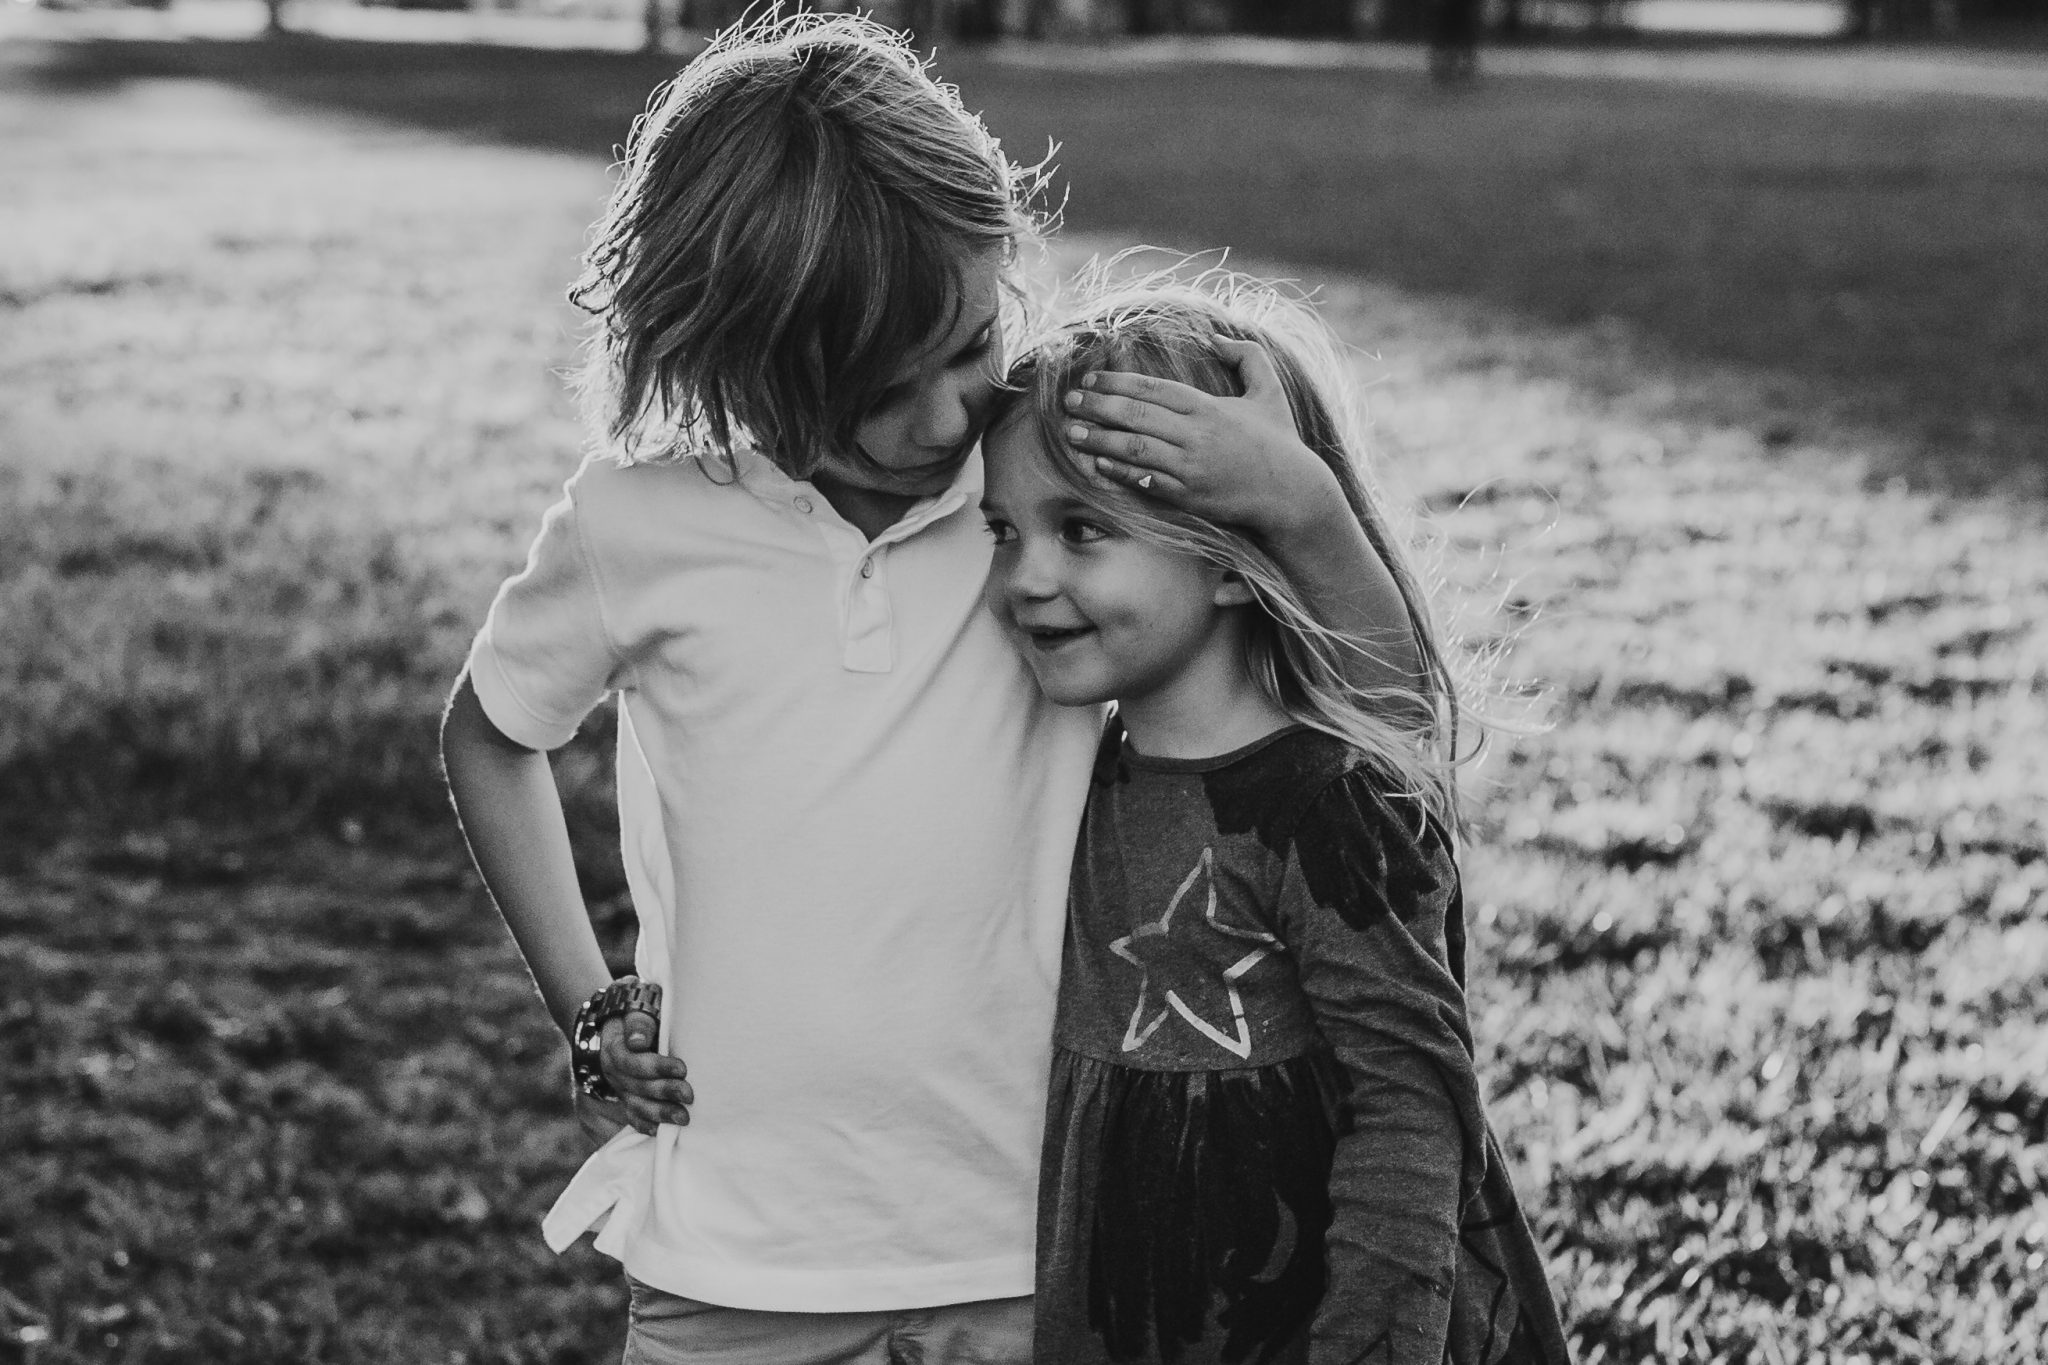 Black and white image of young boy hugging his sister side on while looking at her as she smiles